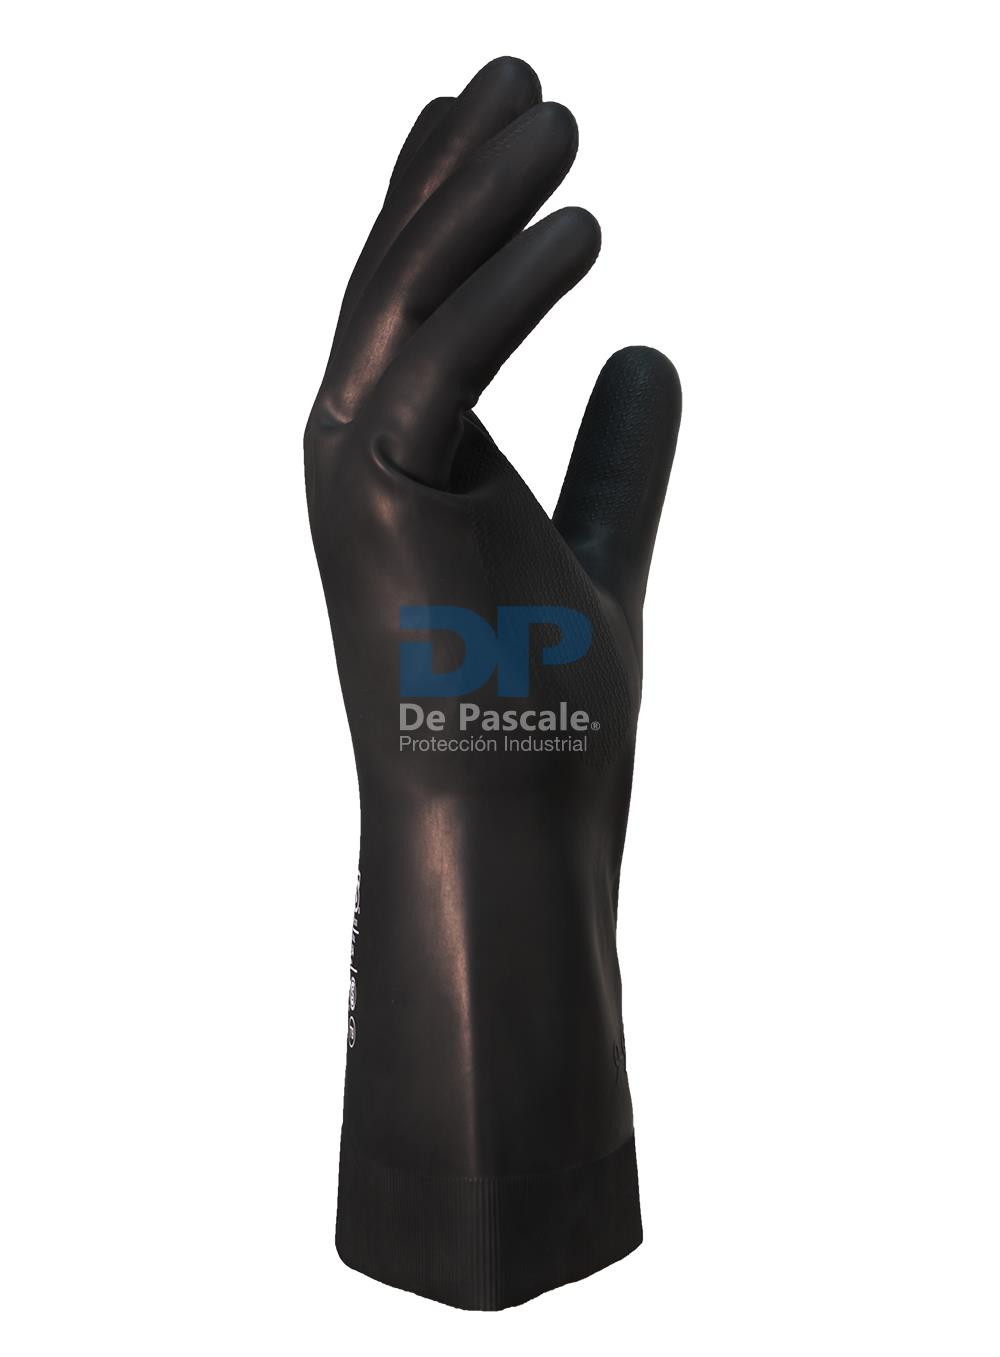 GUANTES LATEX NEGRO DEPASCALE TALLE 10 DPS71395